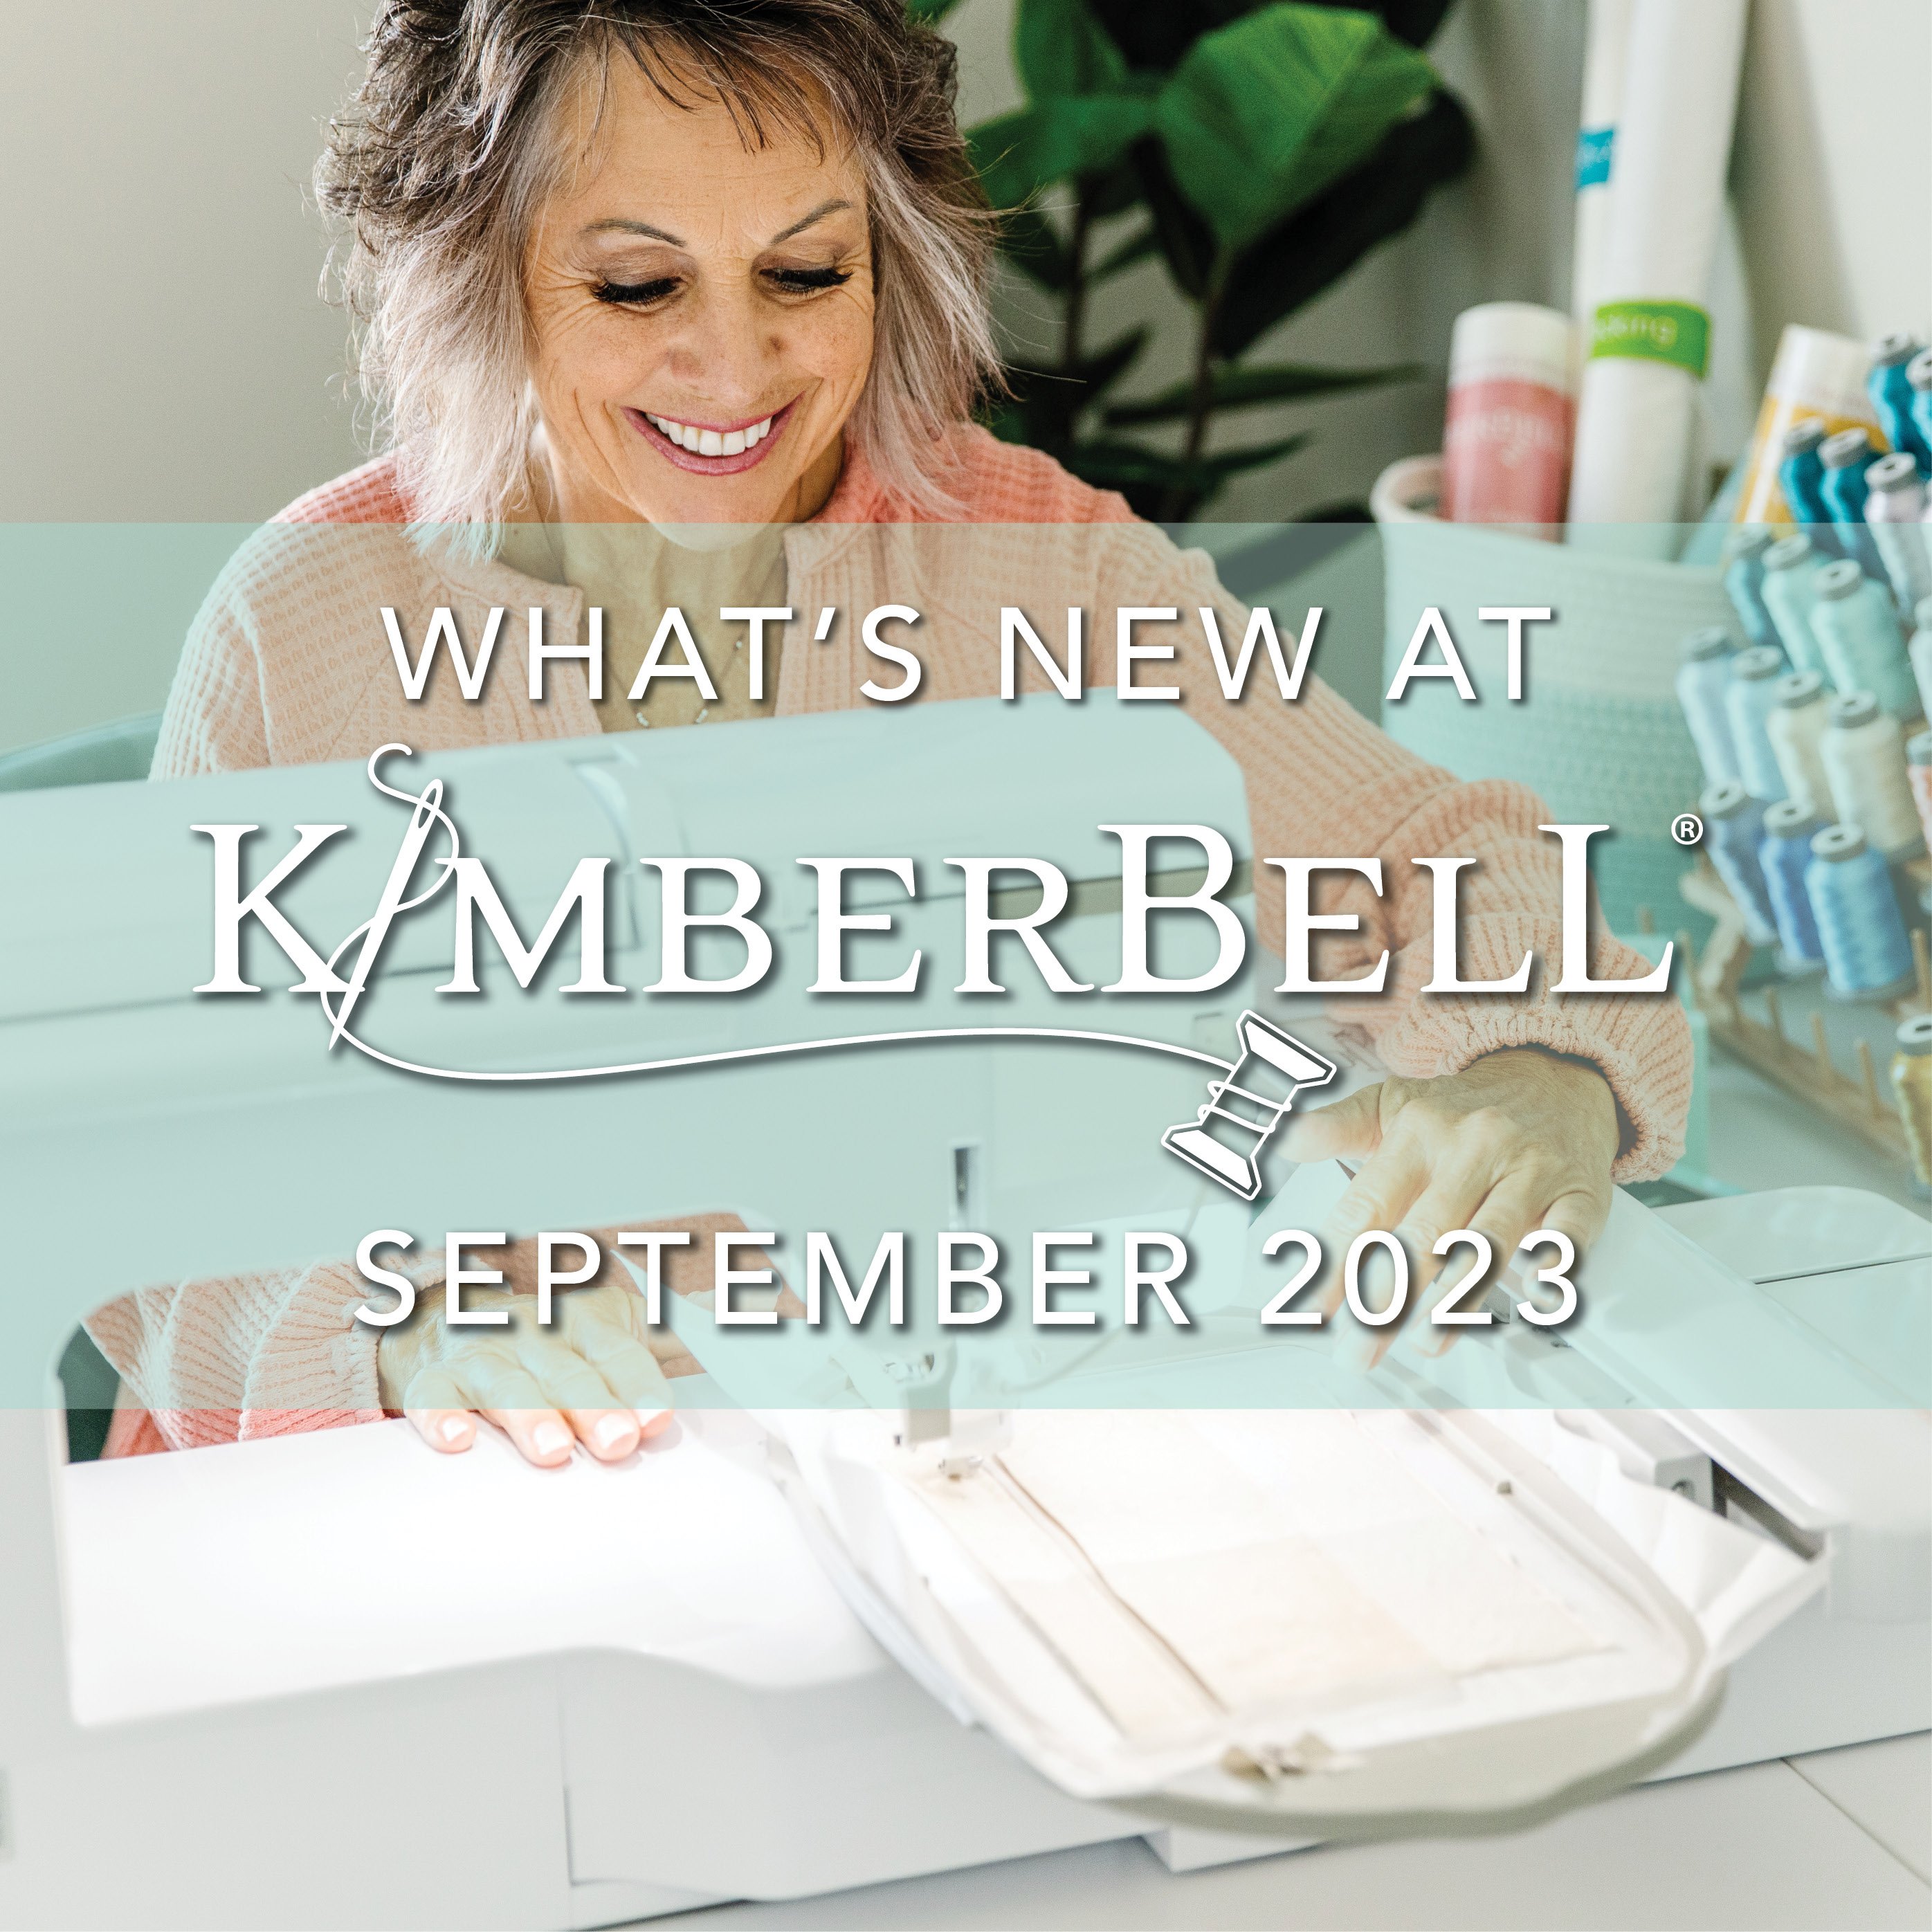 Kimberbell Designs - Whether you're new to Kimberbell or a long